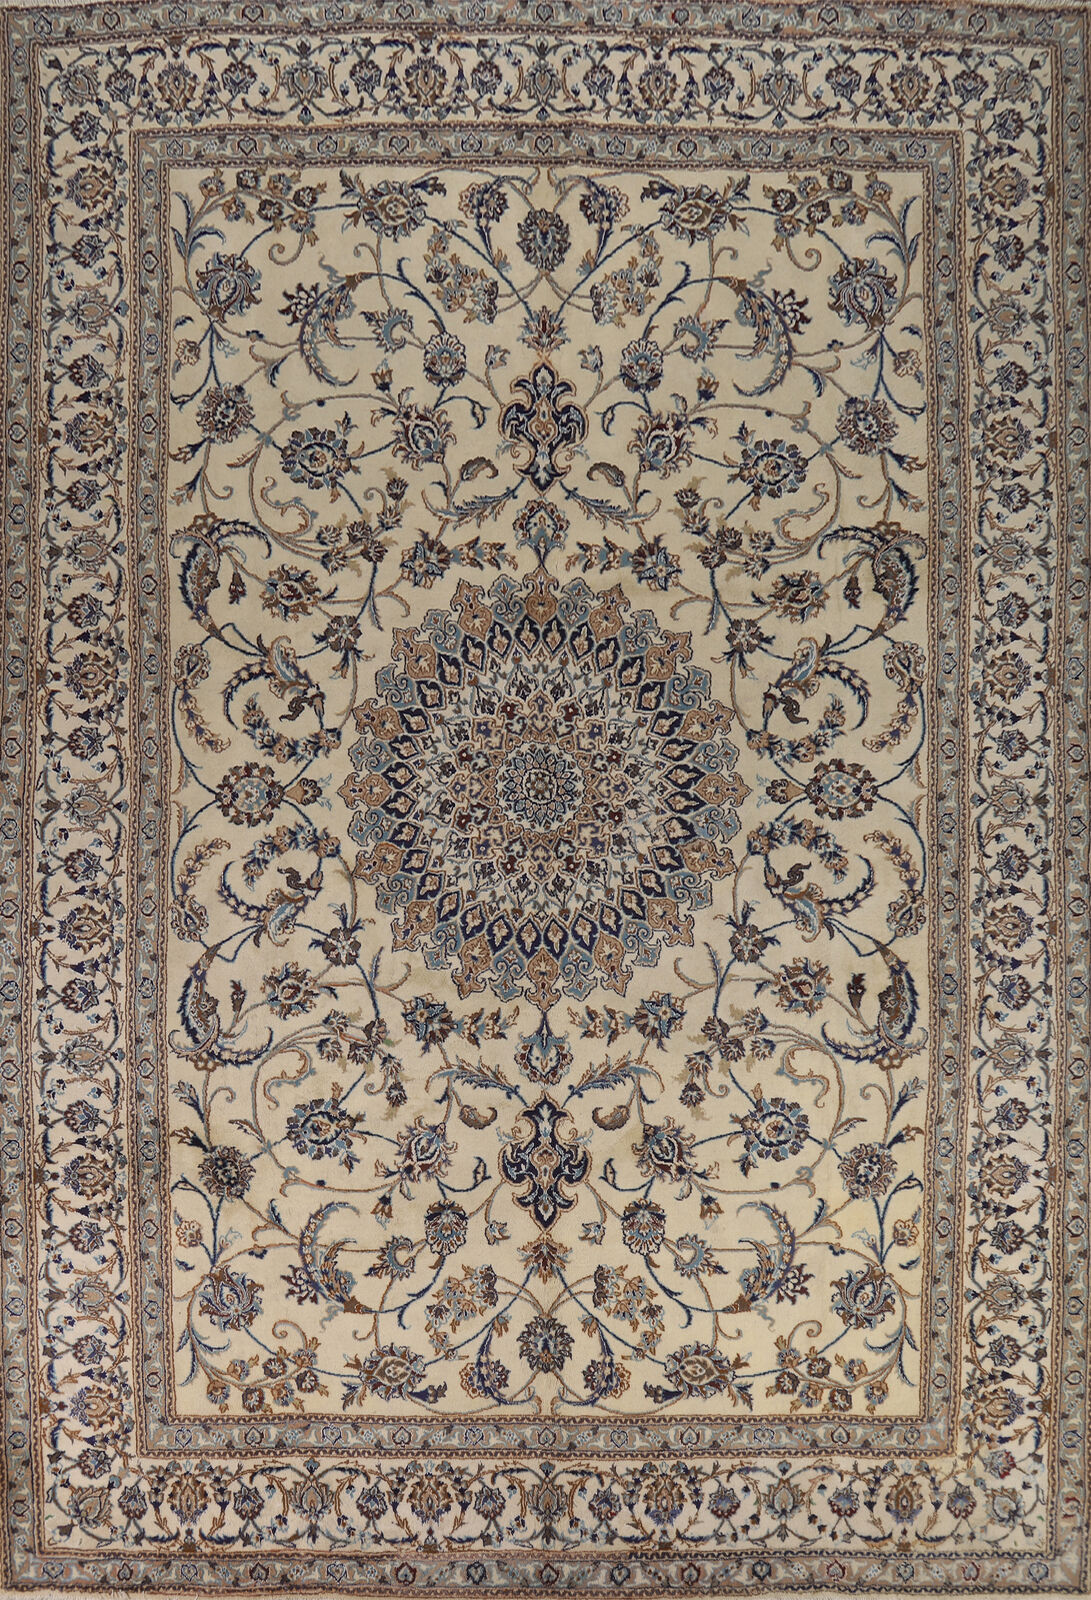 Floral Ivory Wool Medallion Naiein Area Rug 10x13 Hand-made Living Room Carpet